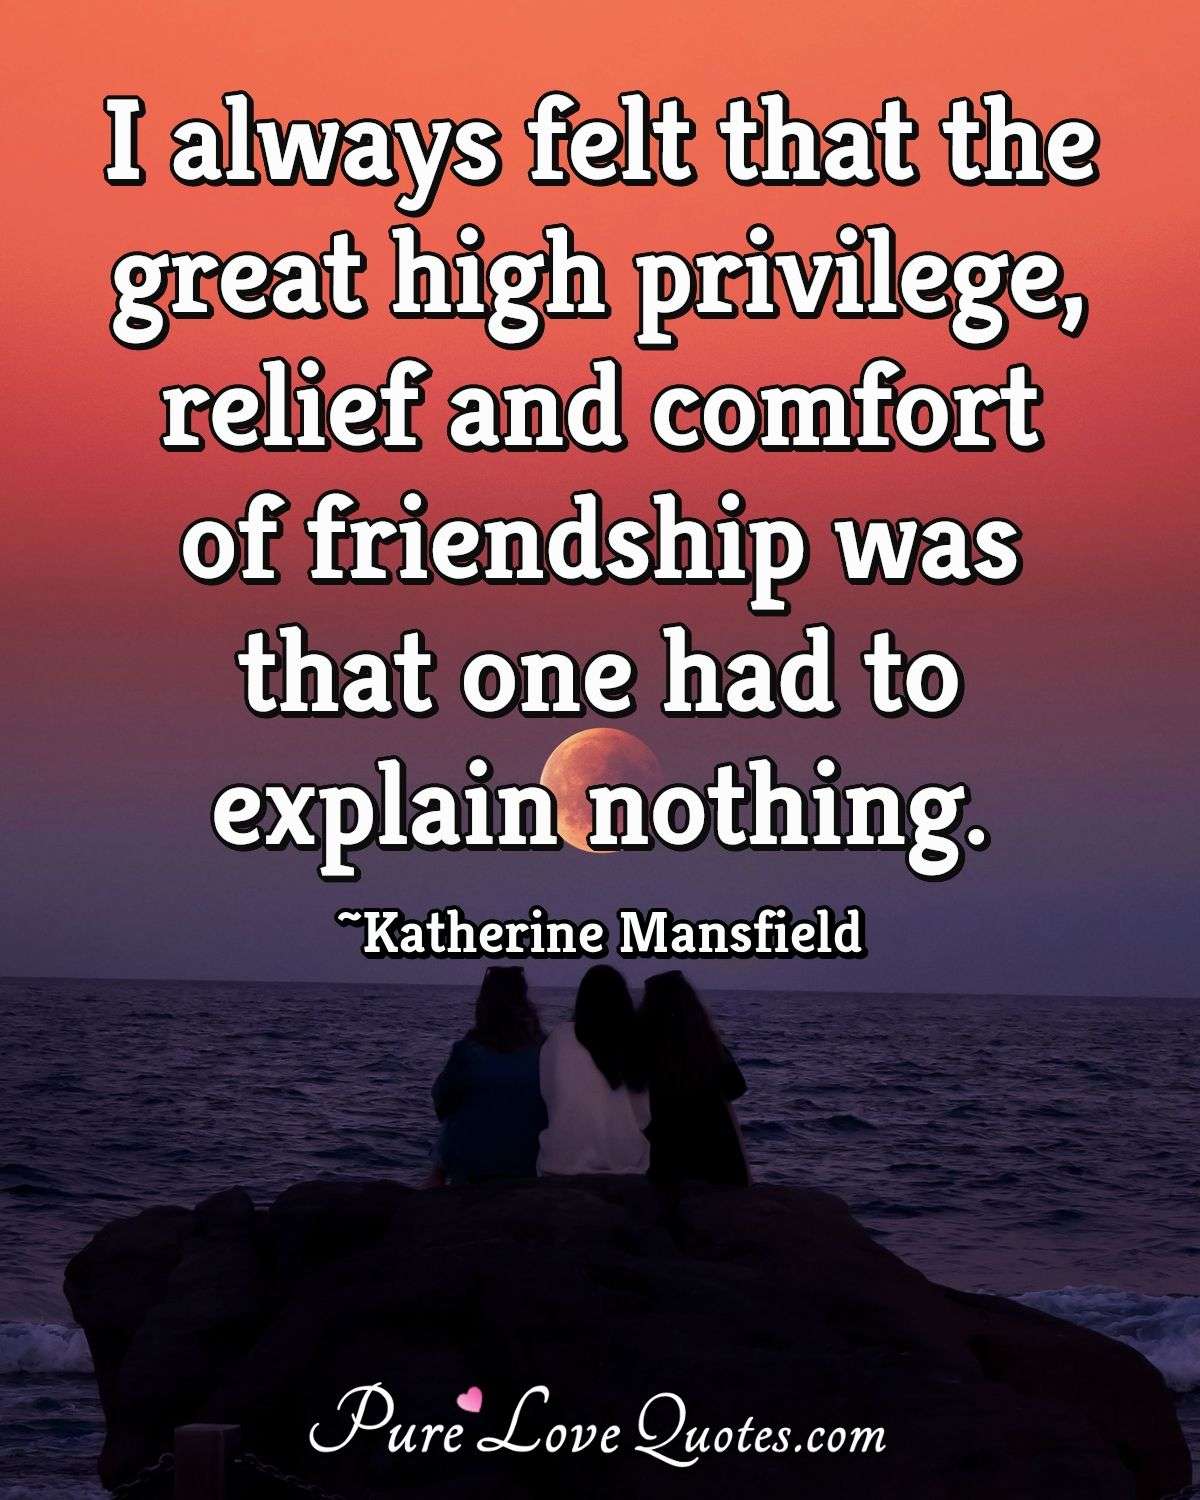 I always felt that the great high privilege, relief and comfort of friendship was that one had to explain nothing. - Katherine Mansfield